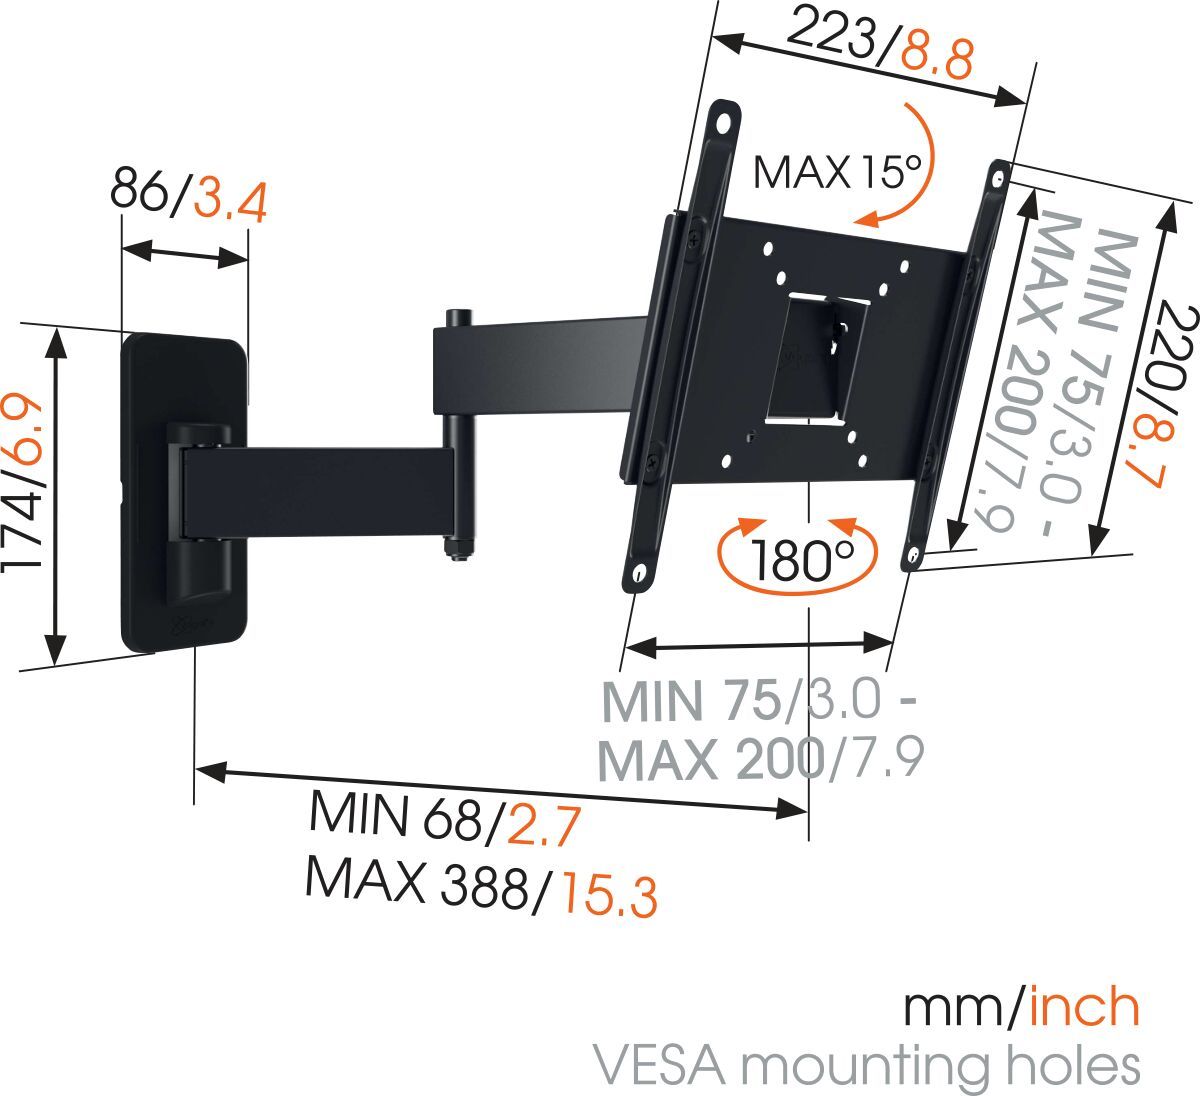 Vogel's MA2040 Full-Motion TV Wall Mount - Suitable for 19 up to 43 inch TVs - Full motion (up to 180°) - Tilt up to 10° - Dimensions